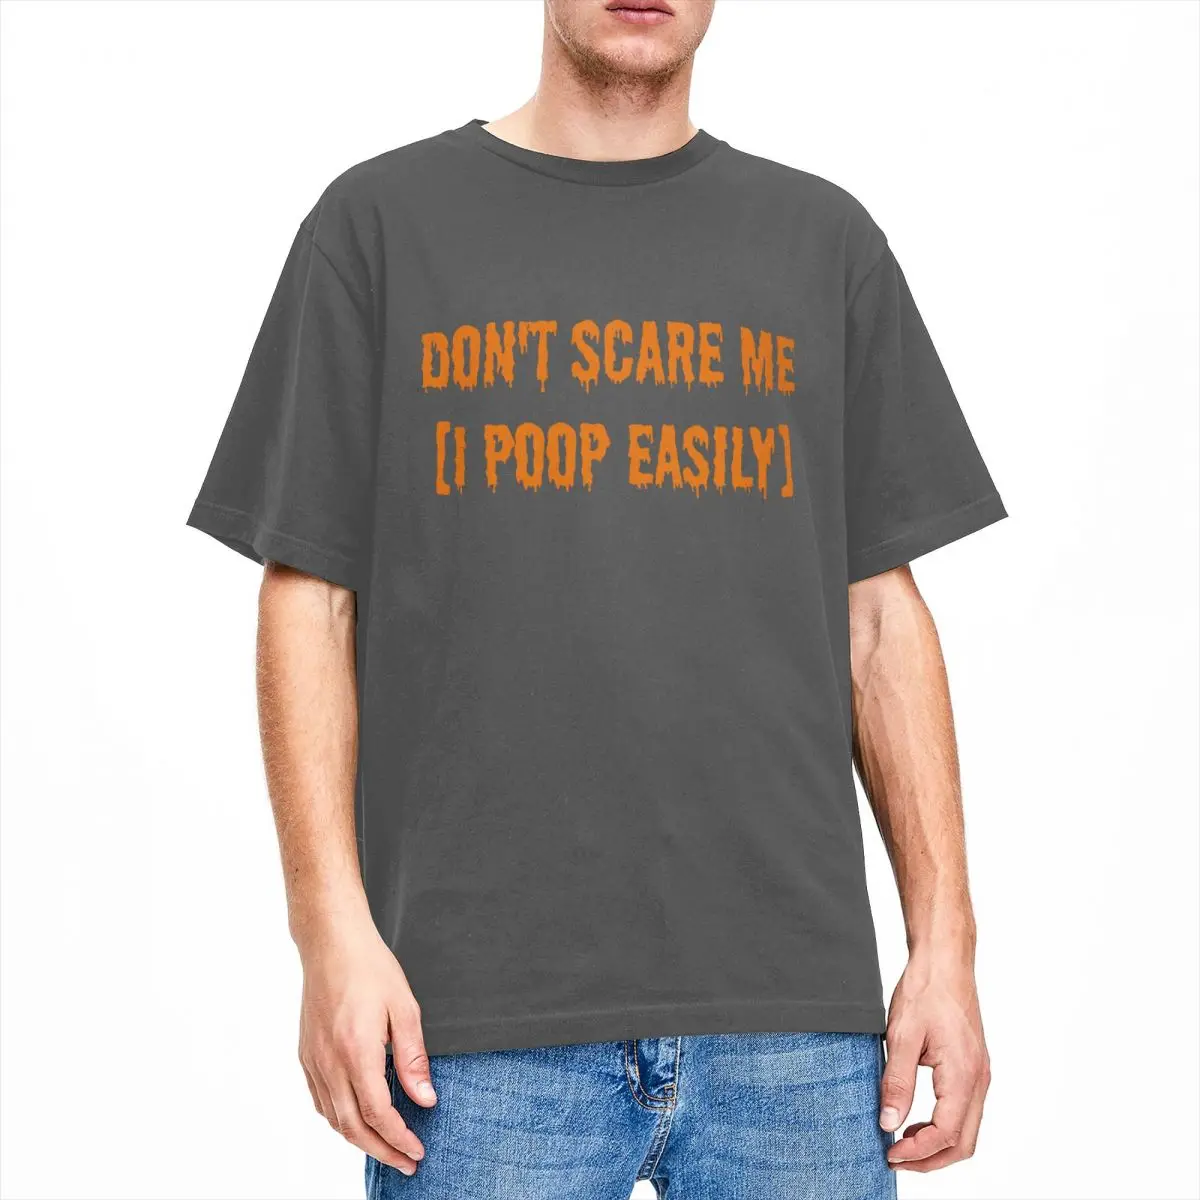 

Don't Scare Me I Poop Easily T-Shirt for Men Funny Halloween Sarcastic Quote Humor 100% Cotton Tee T Shirts Plus Size Clothes